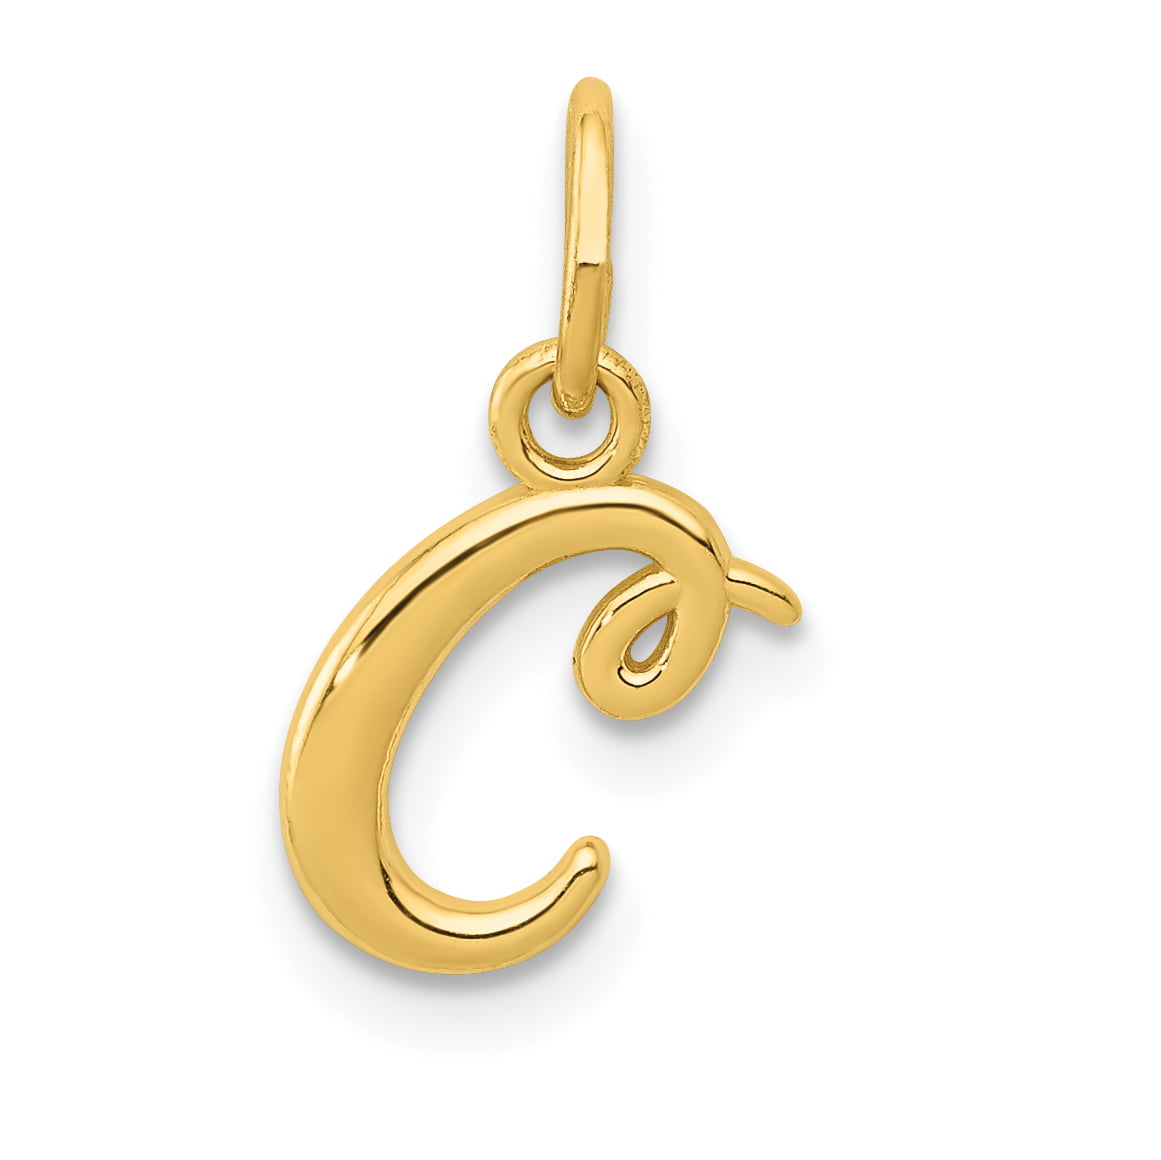 K&C 14k Yellow Gold Initial Charm on a 14K Yellow Gold Carded Rope Chain Necklace